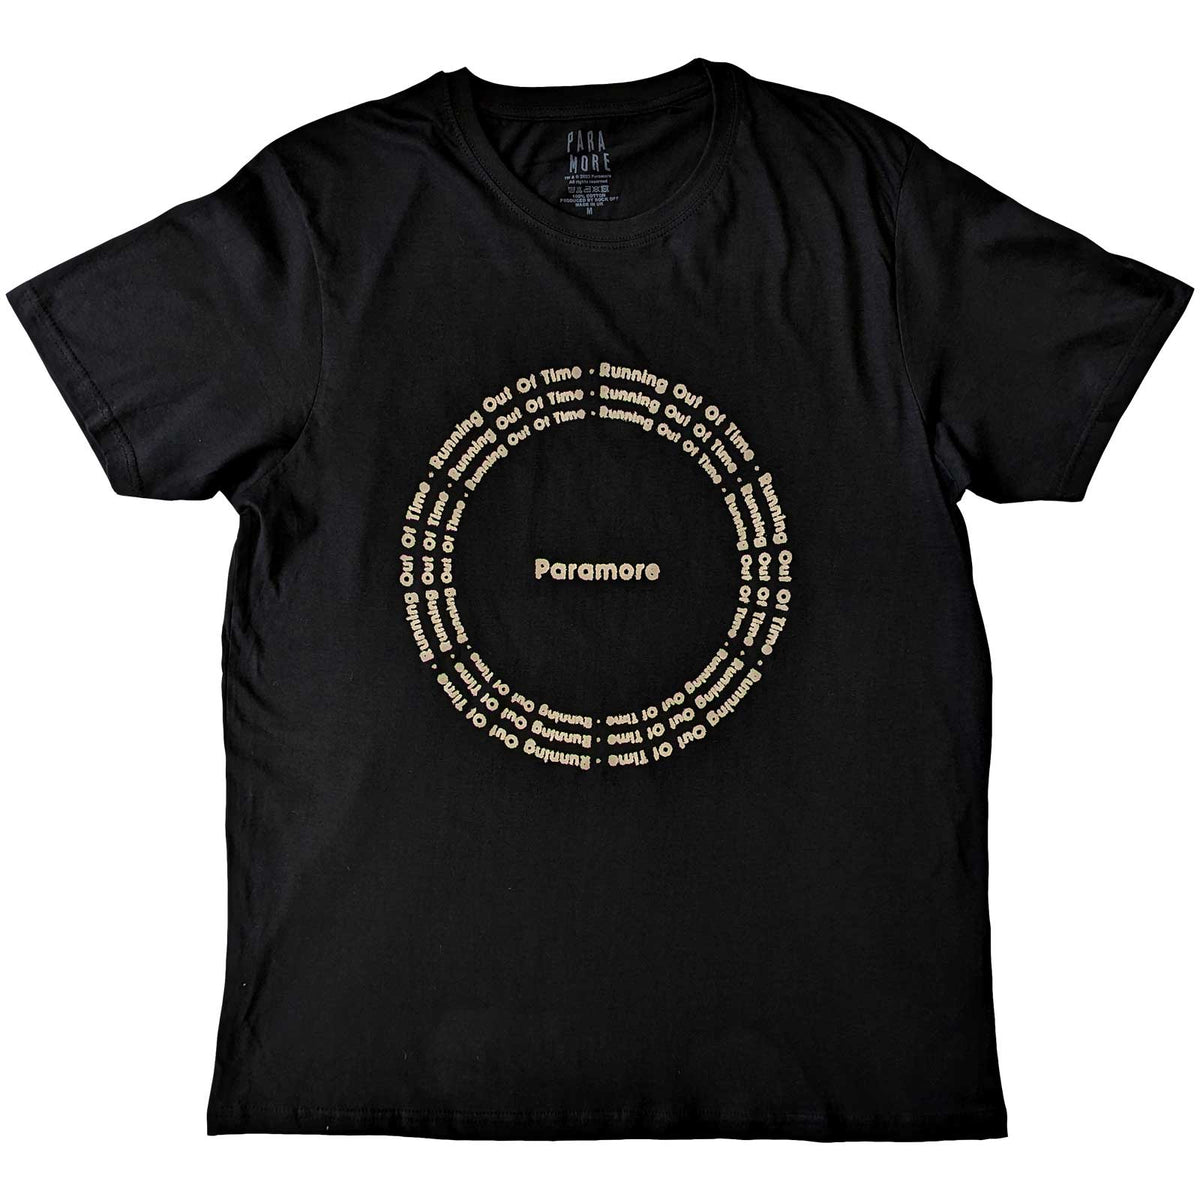 Paramore Adult T-Shirt - Root Circle - Black Official Licensed Design